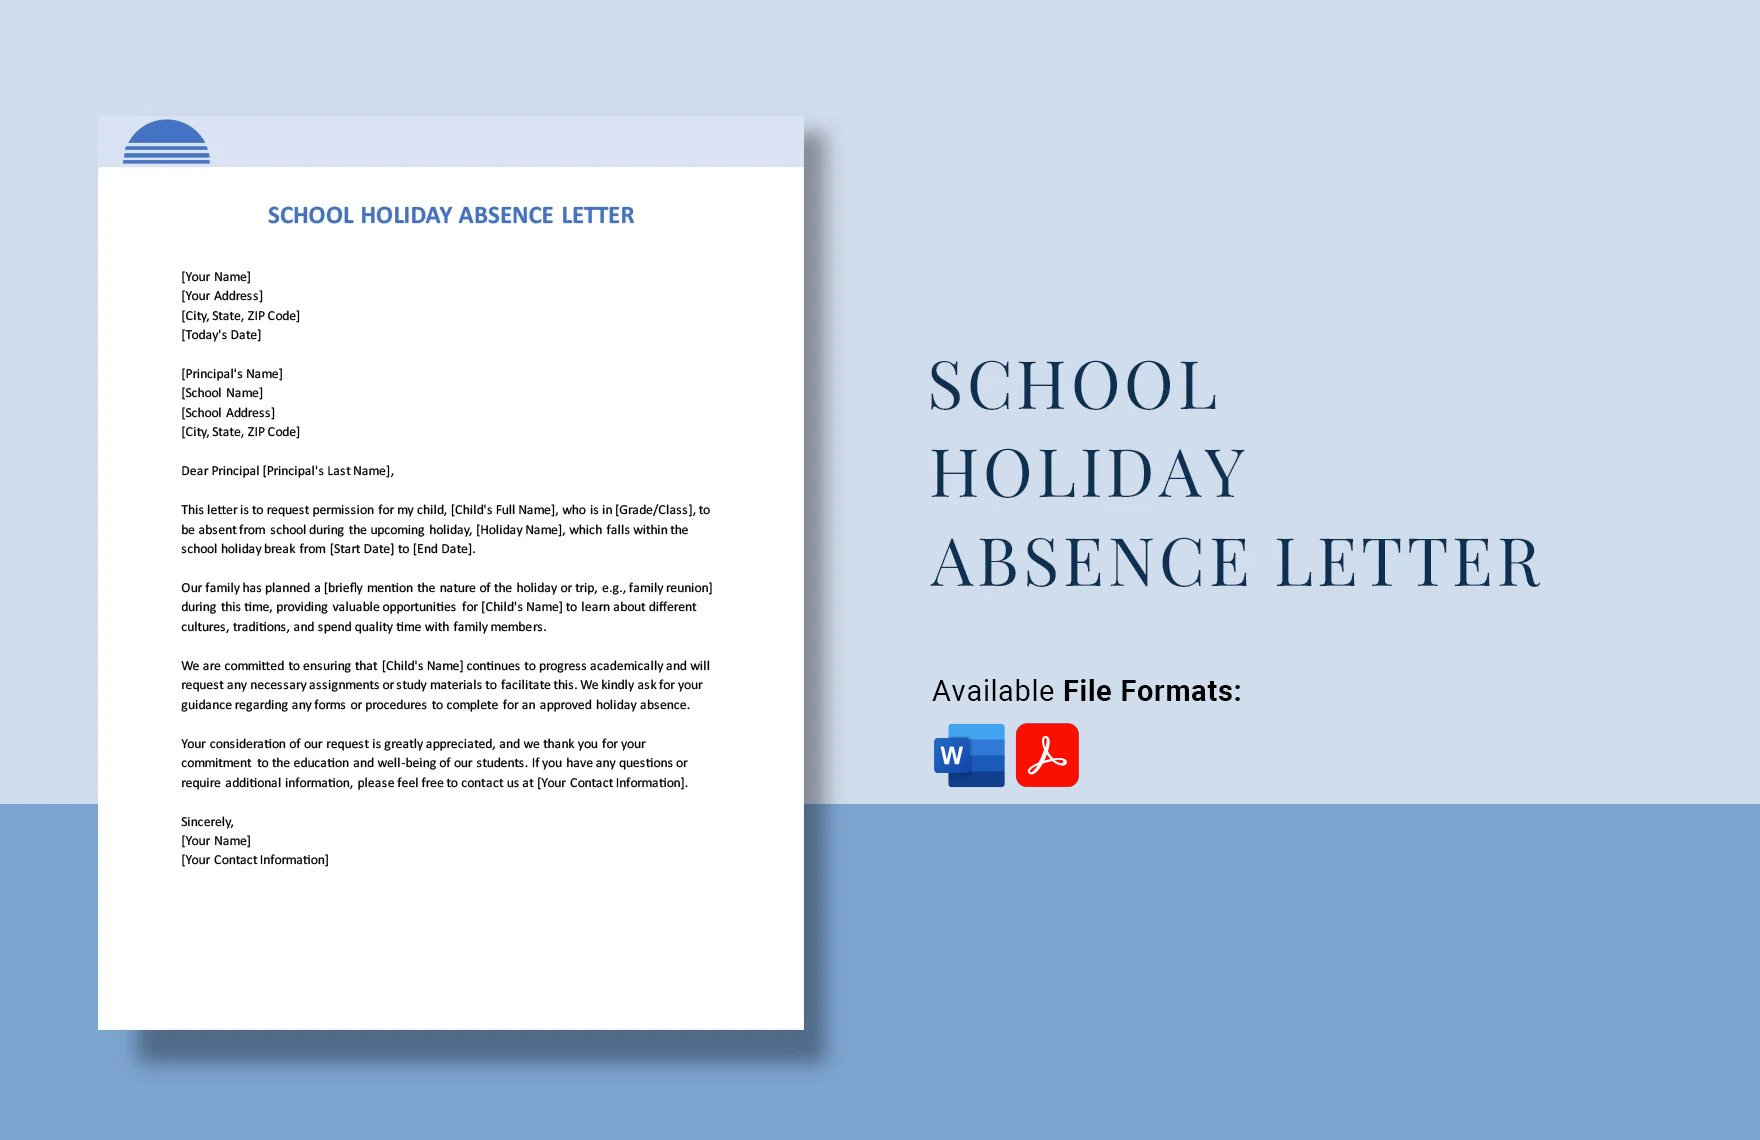 School Holiday Absence Letter in Word, PDF